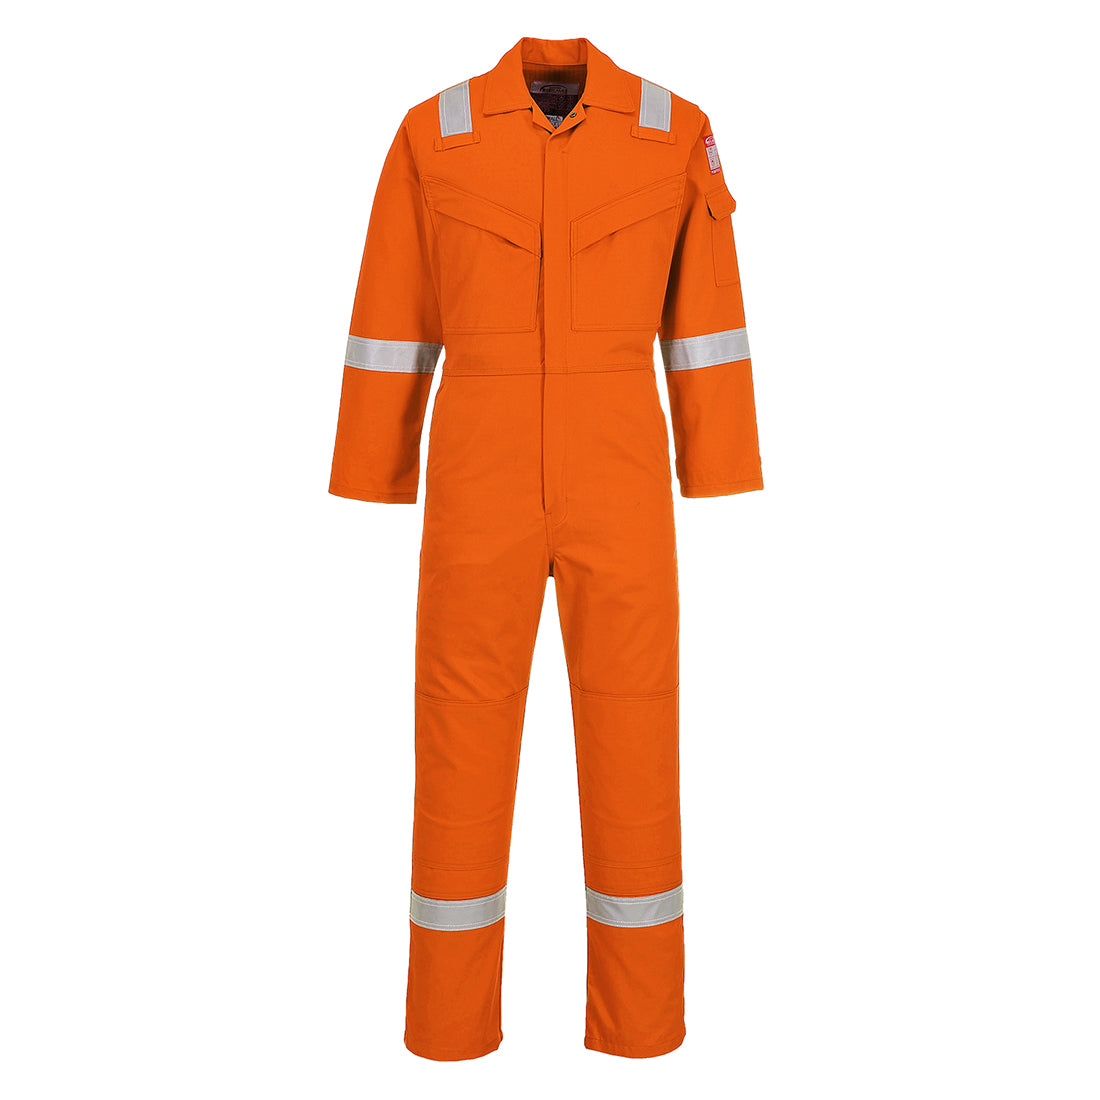 Portwest FR50 Orange Sz XXL Regular Flame Resistant Anti-Static Boiler Suit Coverall Overall